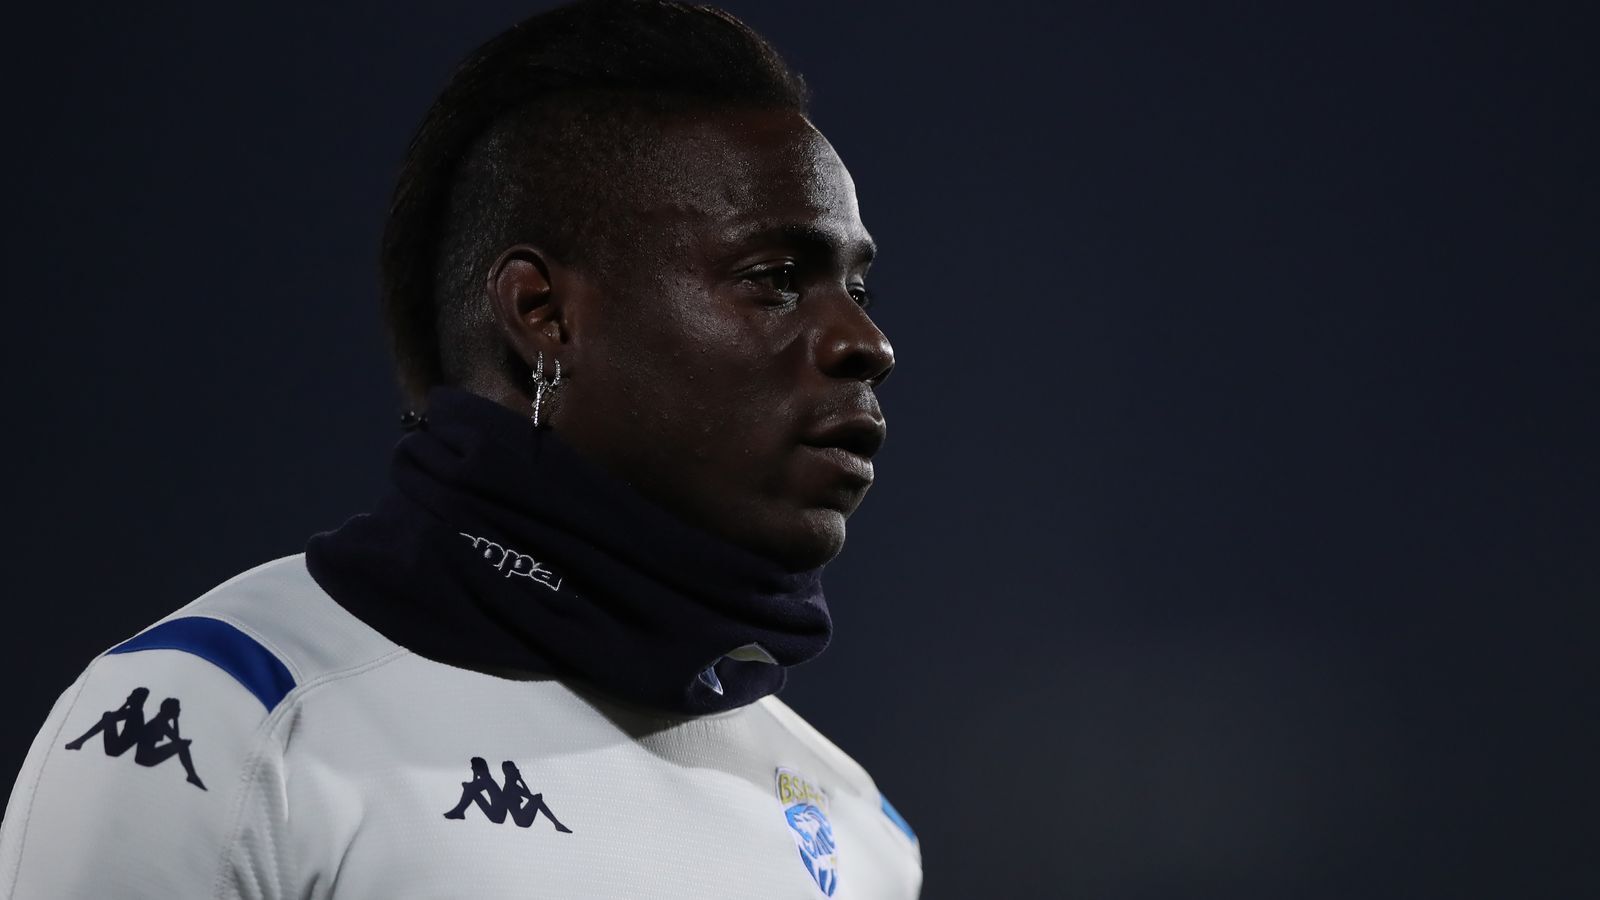 Balotelli Advised to Retire after Splitting from the Brescia Squad